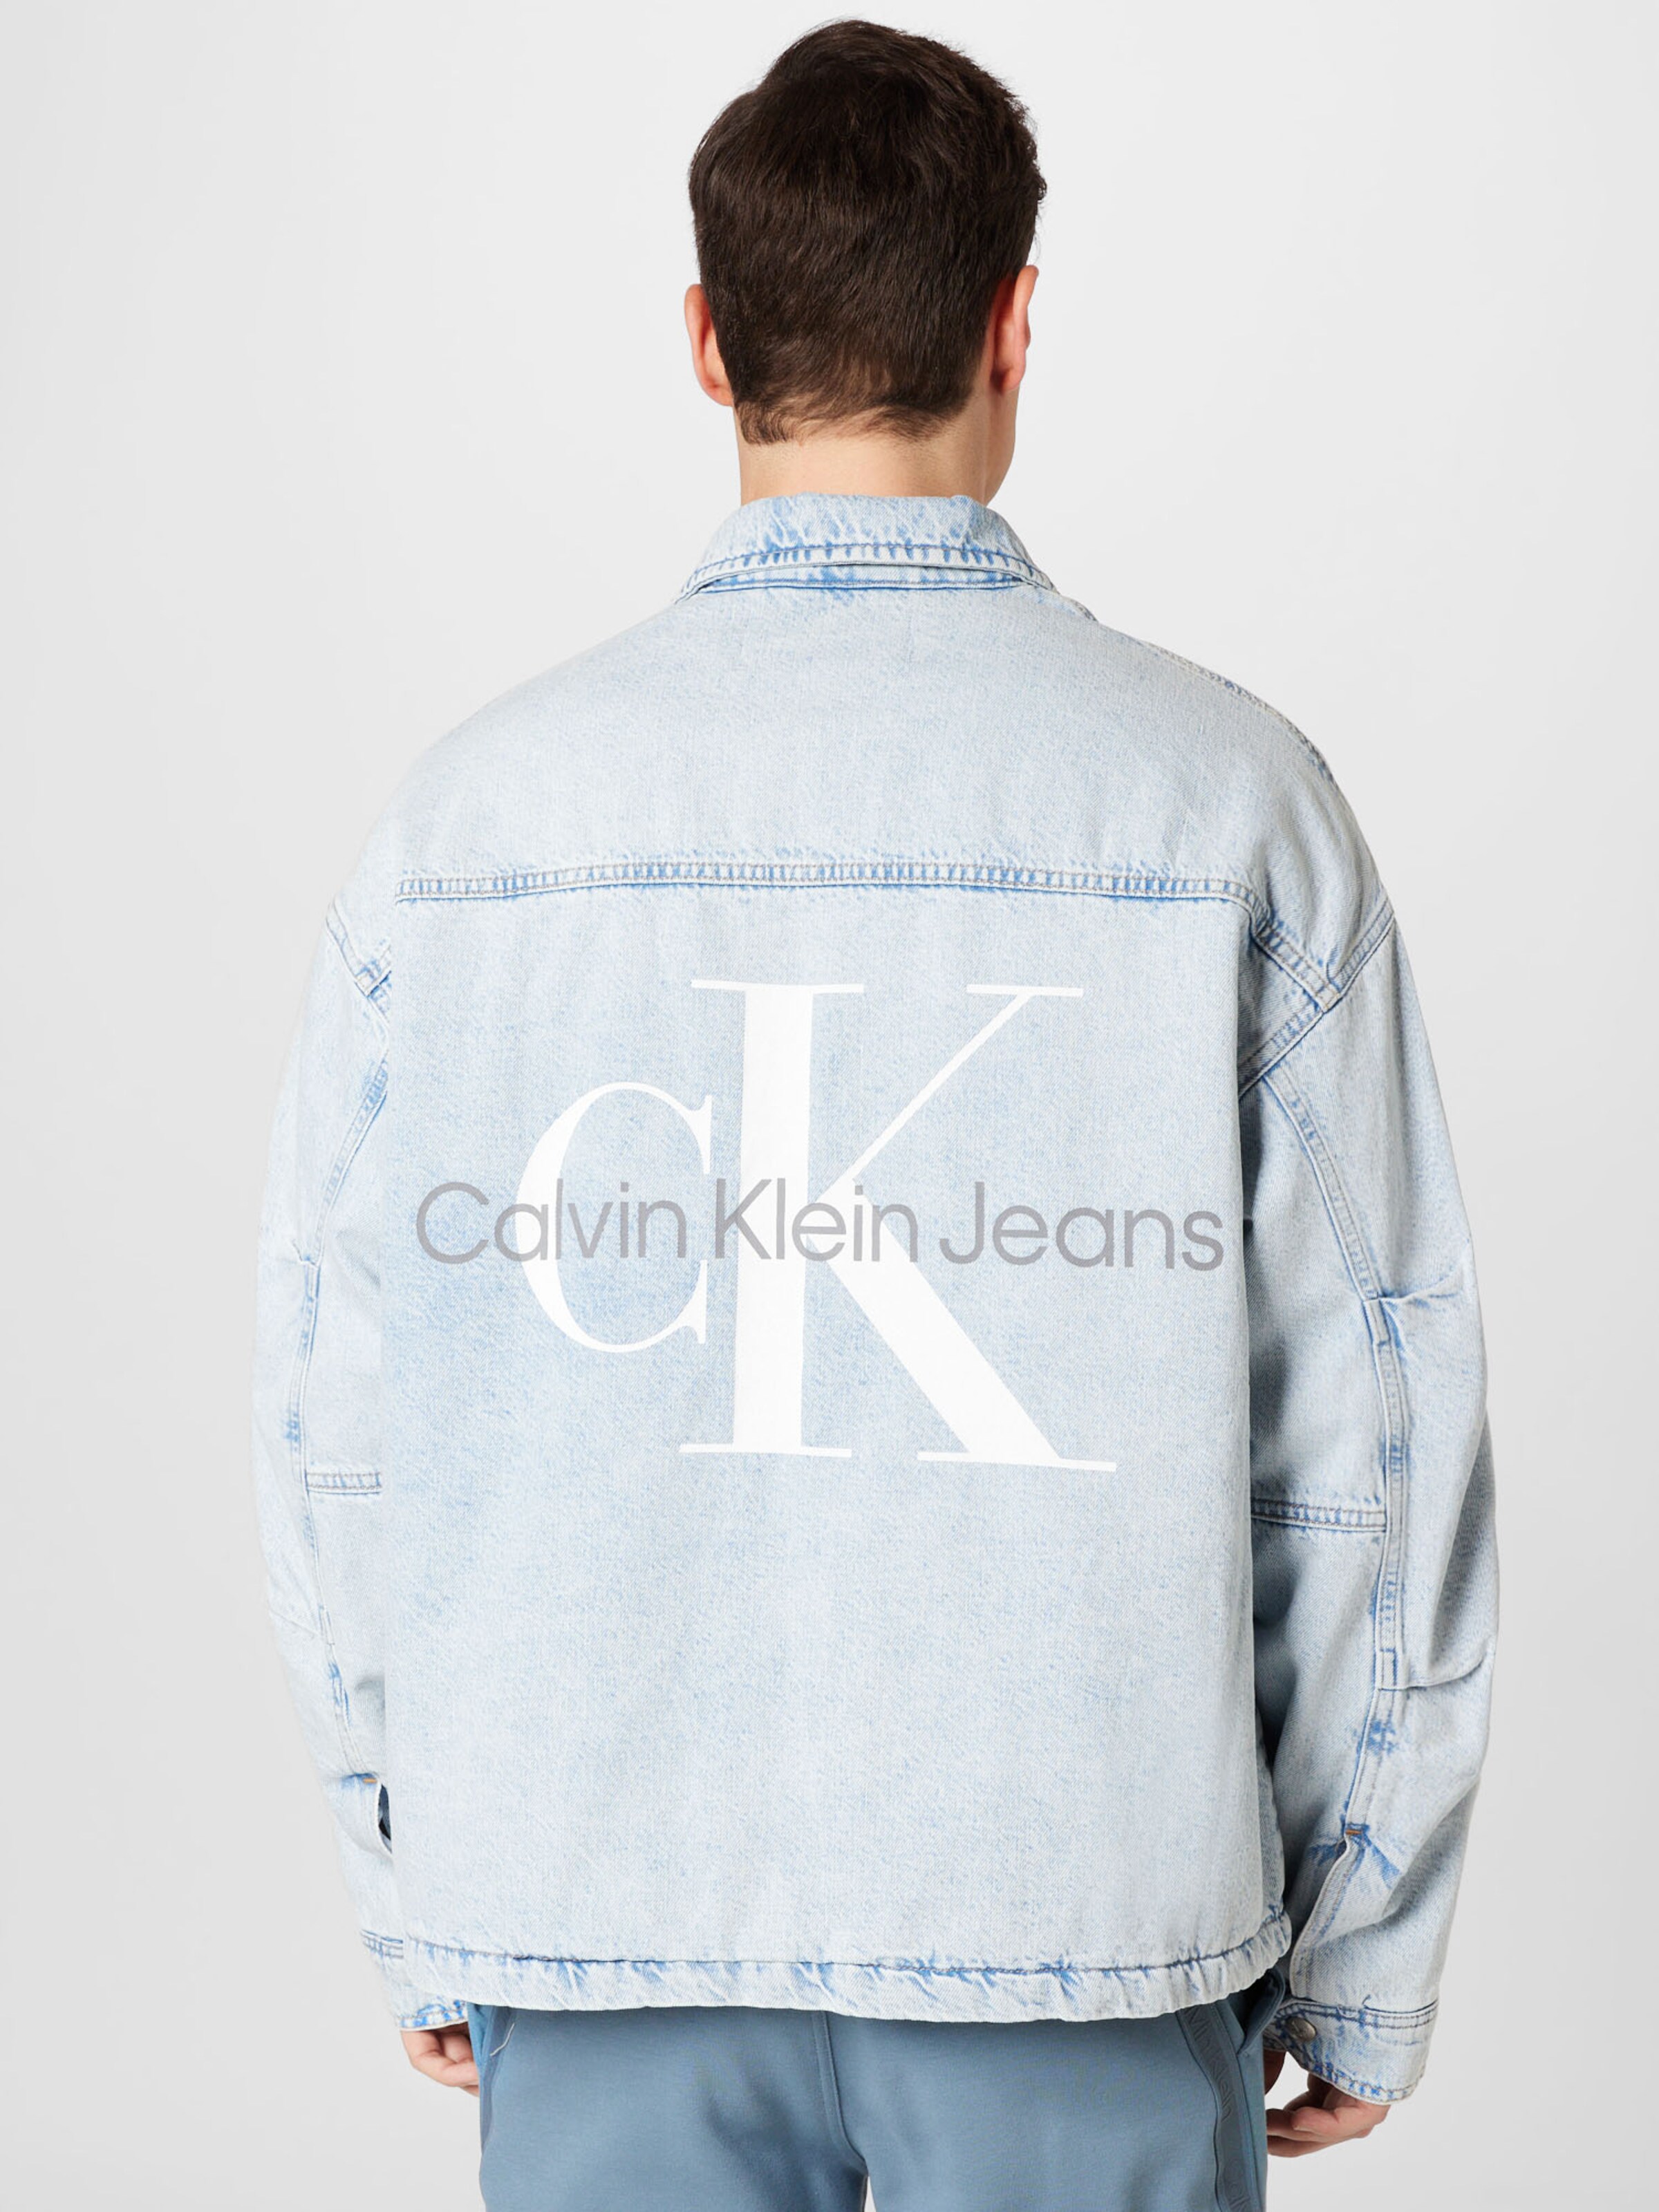 Calvin Klein Jeans Between-Season Jacket in Light Blue | ABOUT YOU